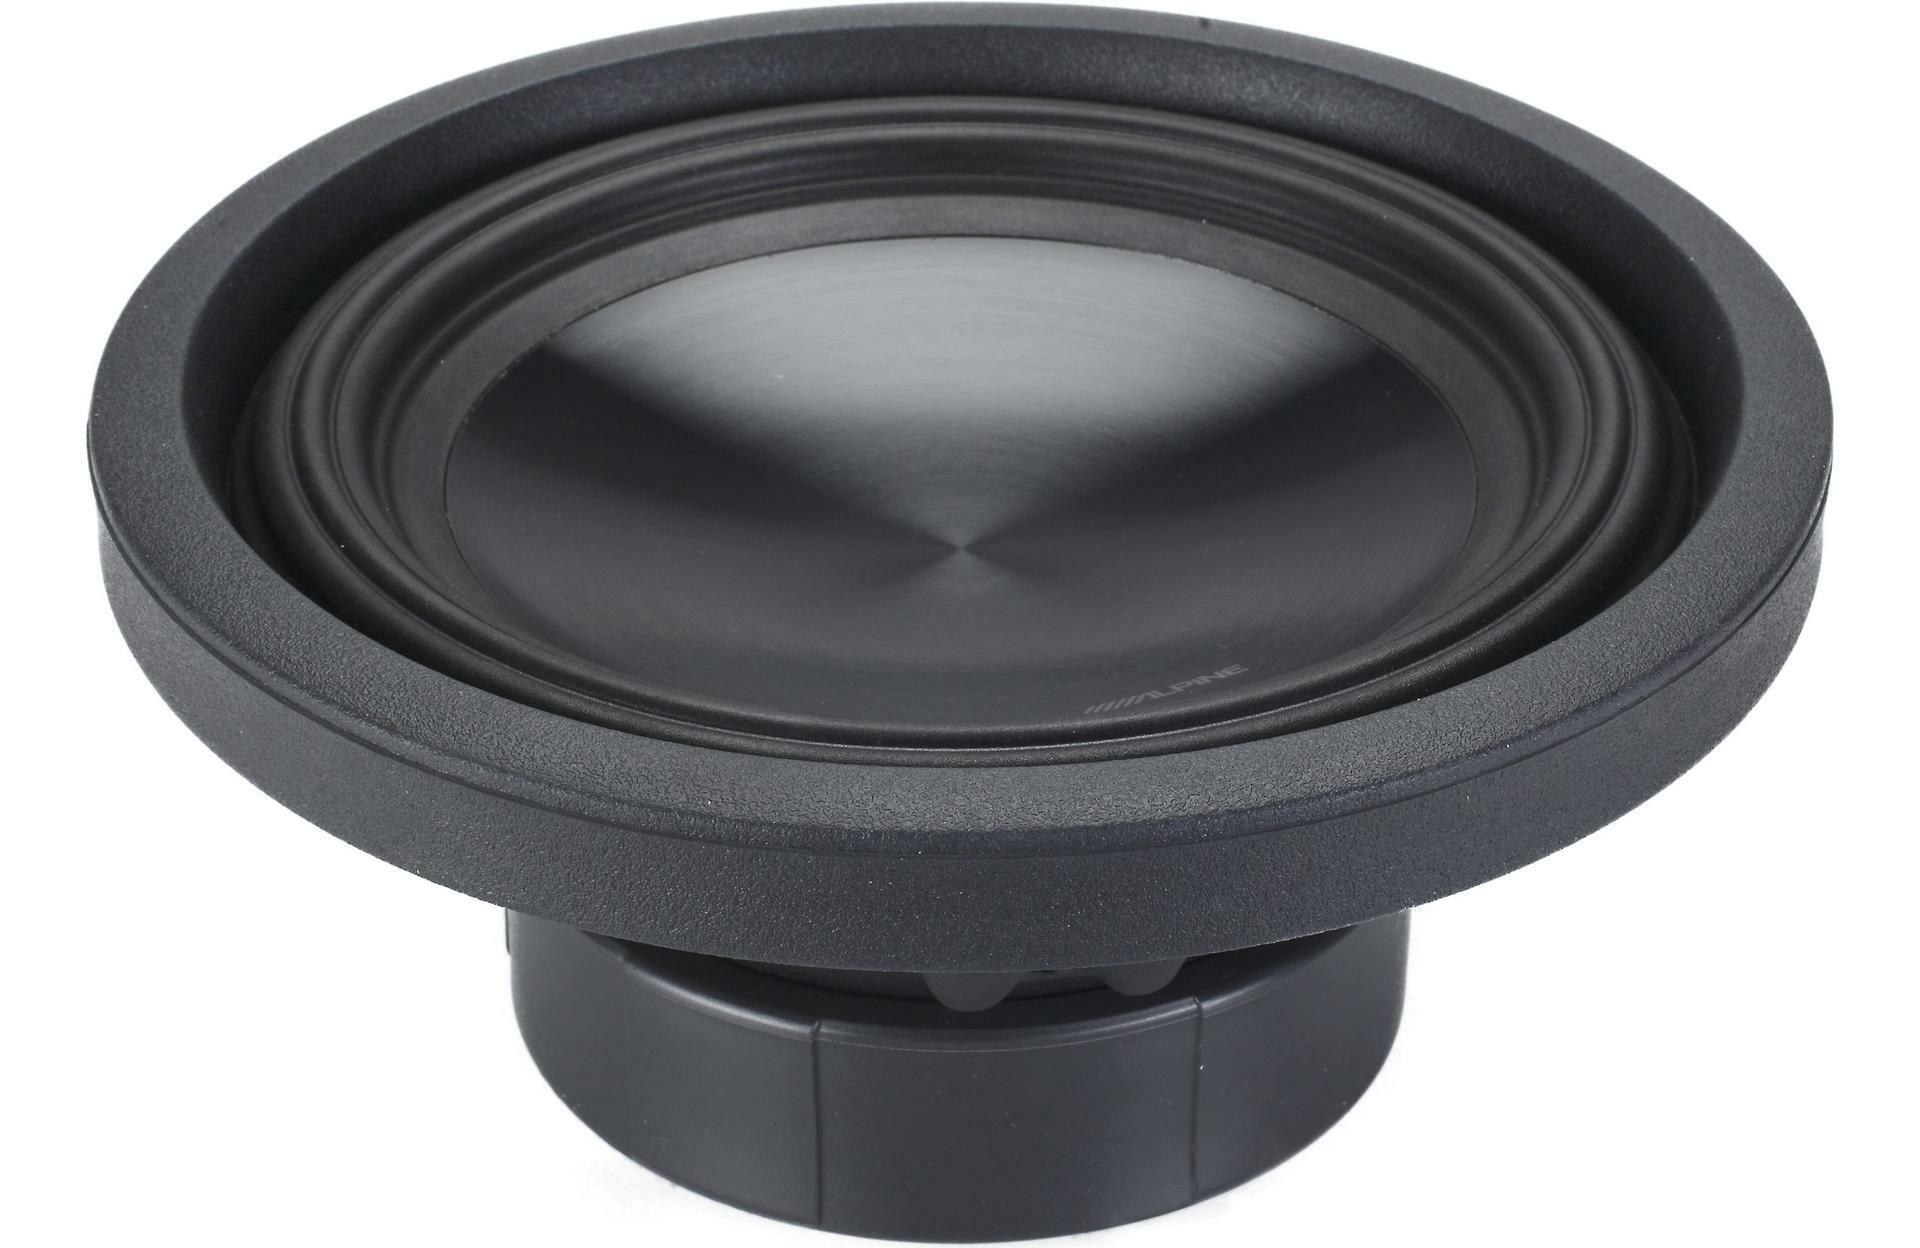 2 X Alpine SWT-10S2  10" truck subwoofer with 2-ohm voice coil + Q Power QBGMC10 2007 4DR 10" 2-Hole Subwoofer Box for GMC/Chevy 2007-13 Crew Cab